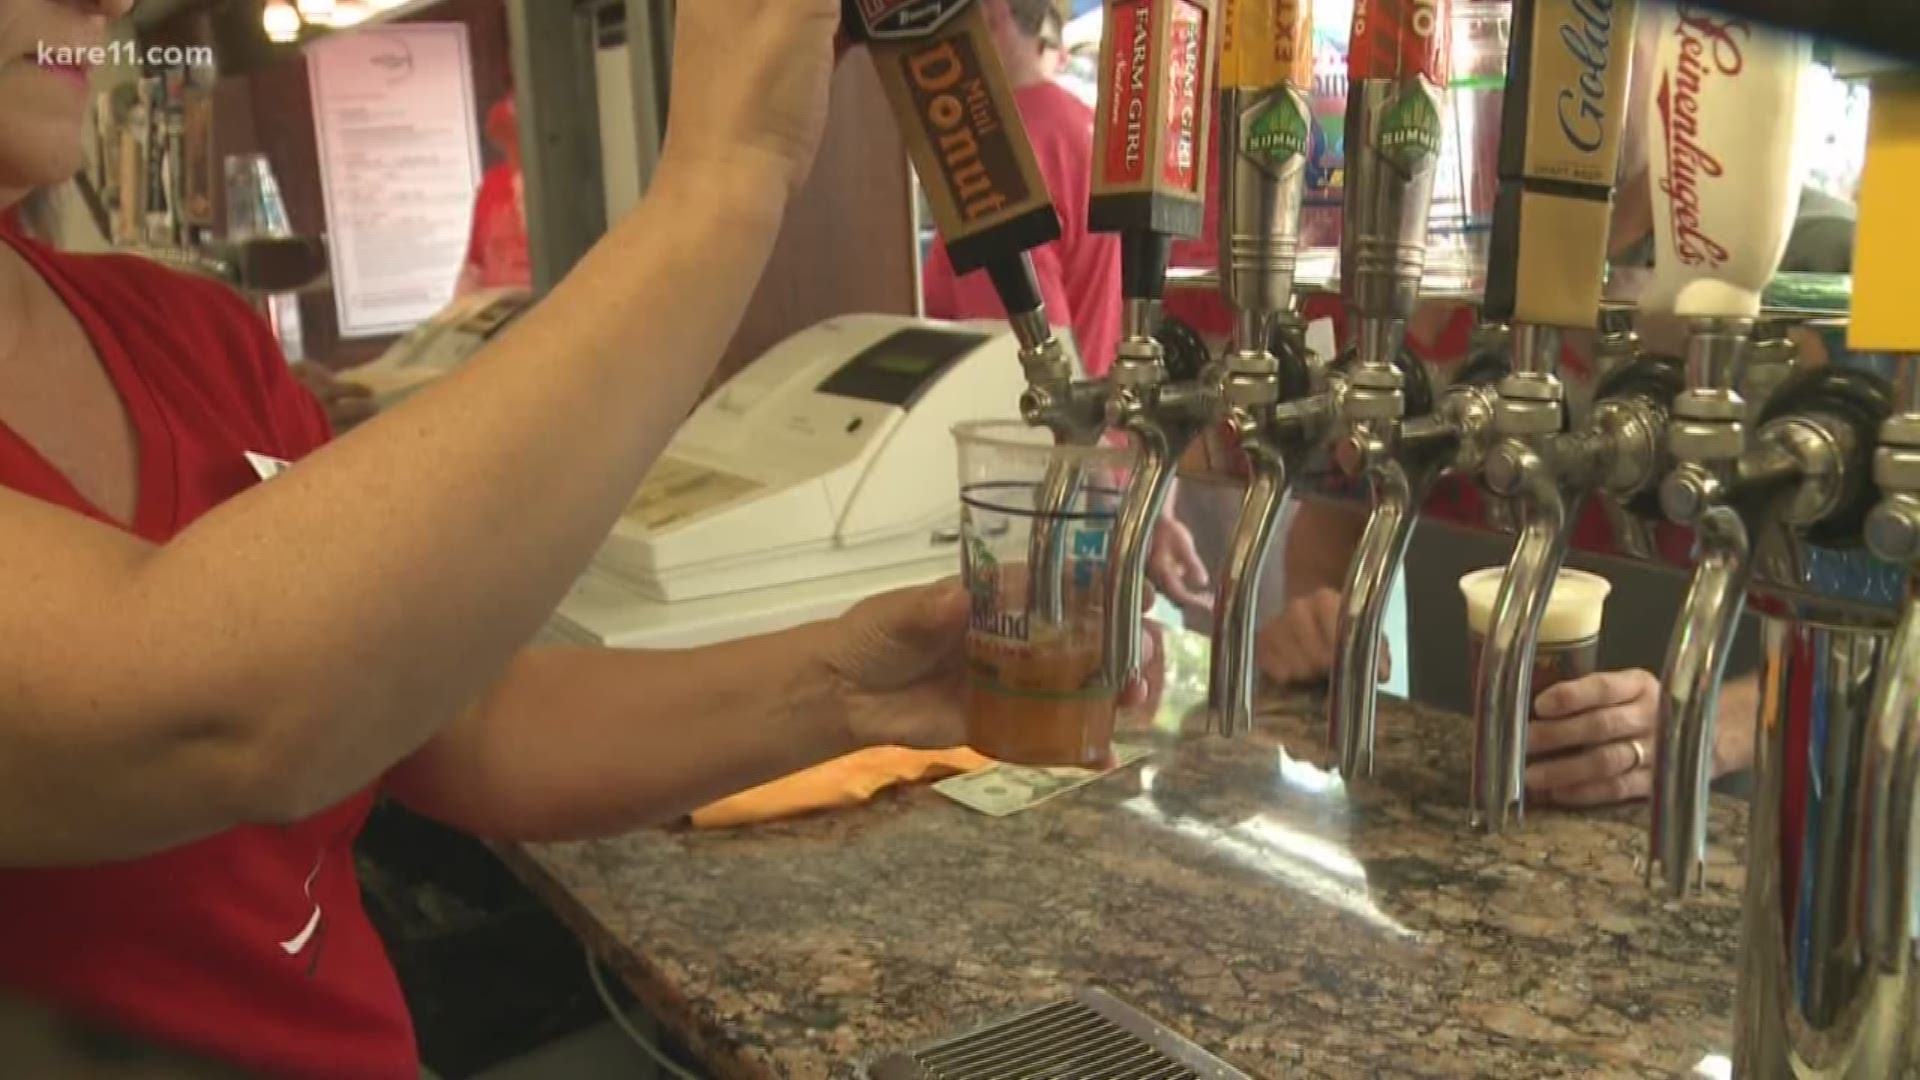 KARE 11 recruited two beer-loving fairgoers to sample some of the new beers debuting at the Minnesota State Fair.